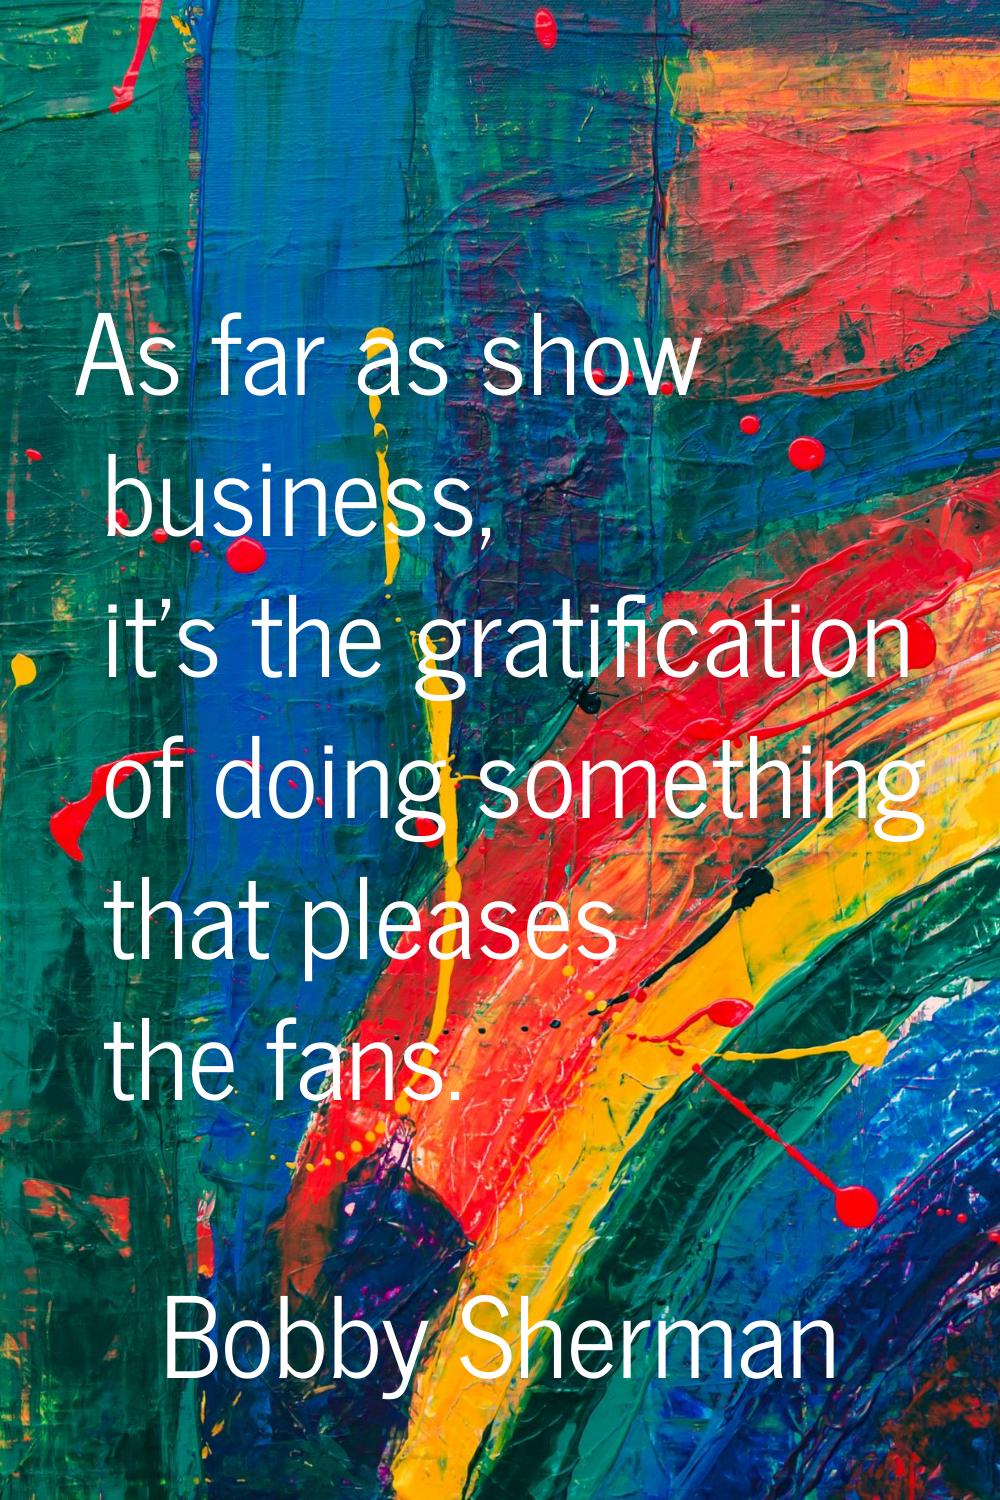 As far as show business, it's the gratification of doing something that pleases the fans.